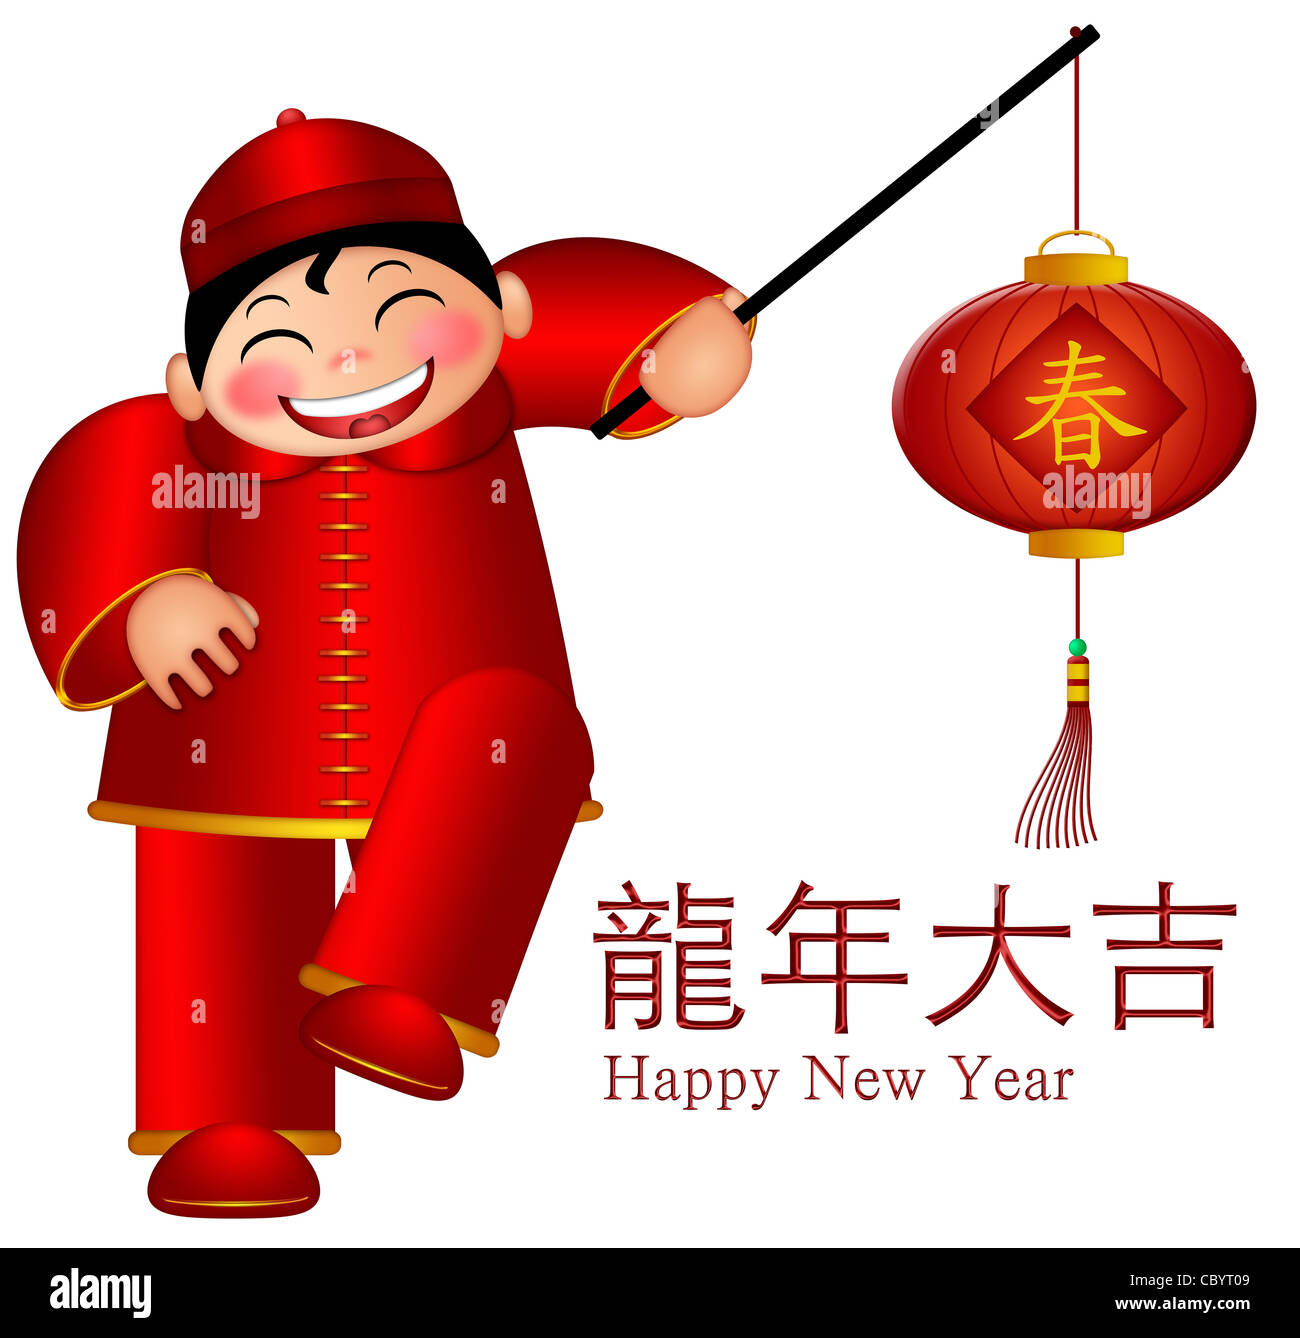 Chinese Boy Holding Spring Word on Lantern with Text Wishing Good Luck in  the Year of the Dragon Illustration Stock Photo - Alamy